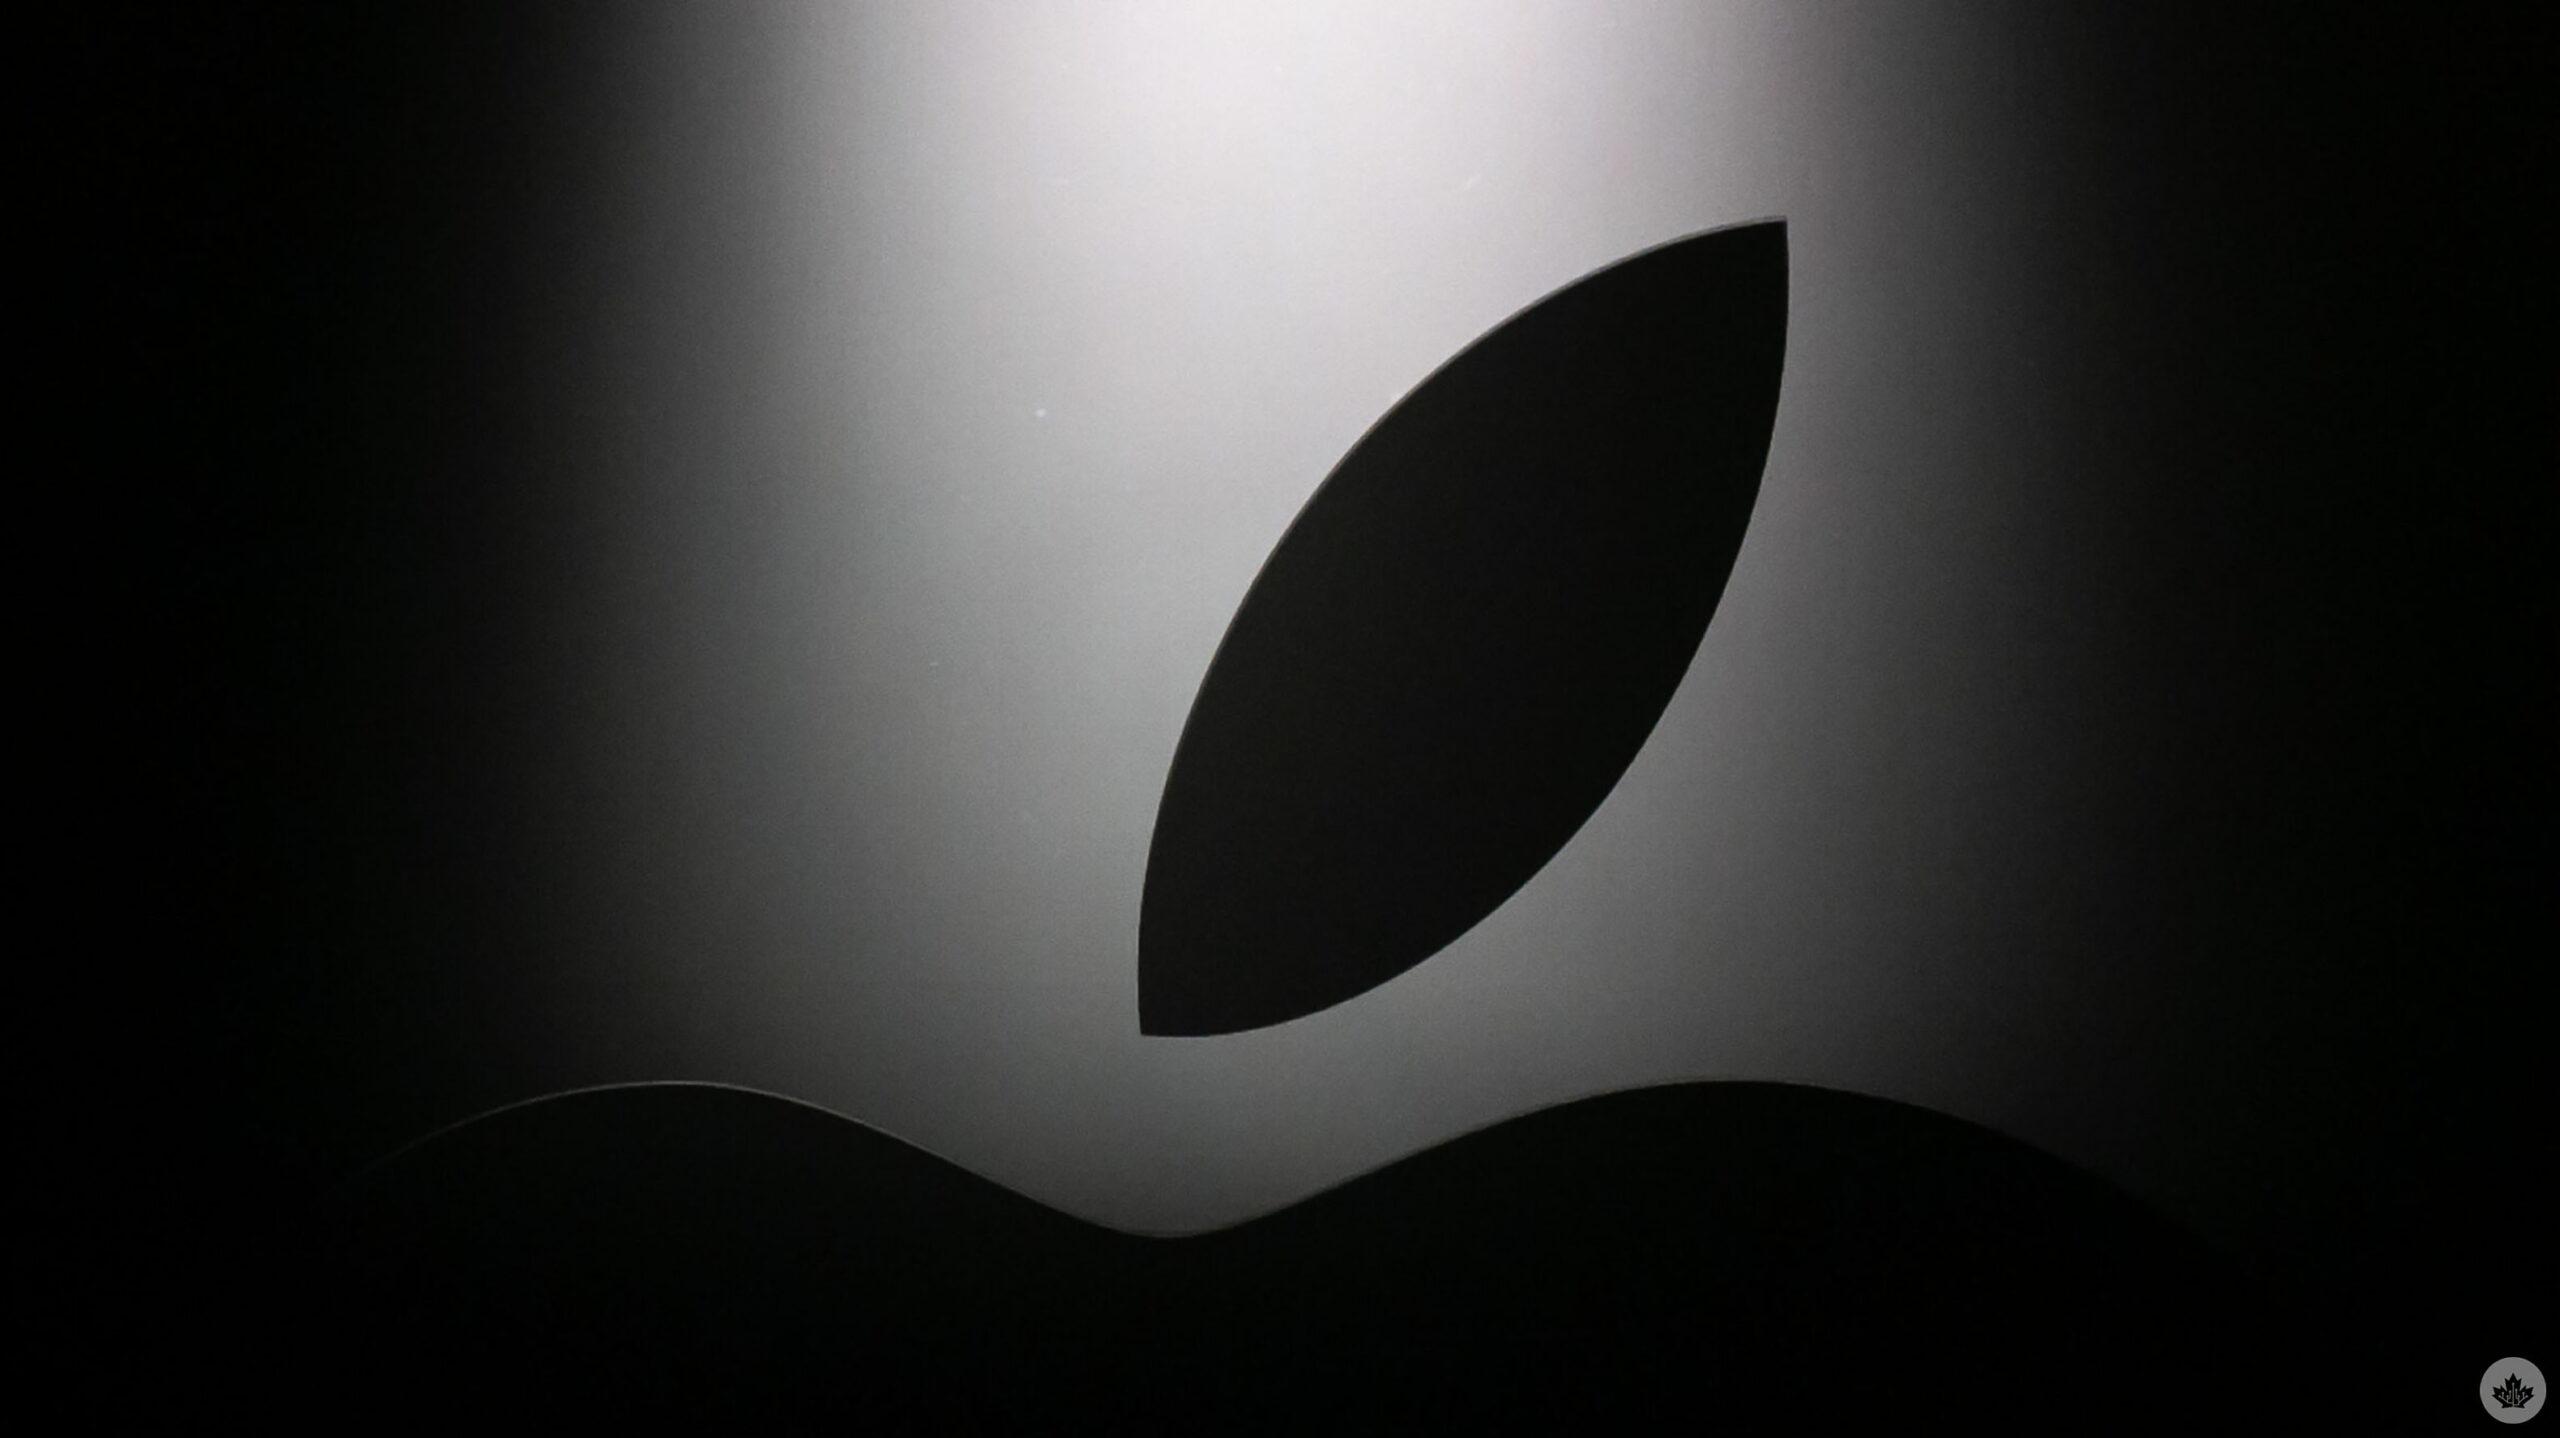 Apples often rumoured VR headset could feature 3000ppi Micro